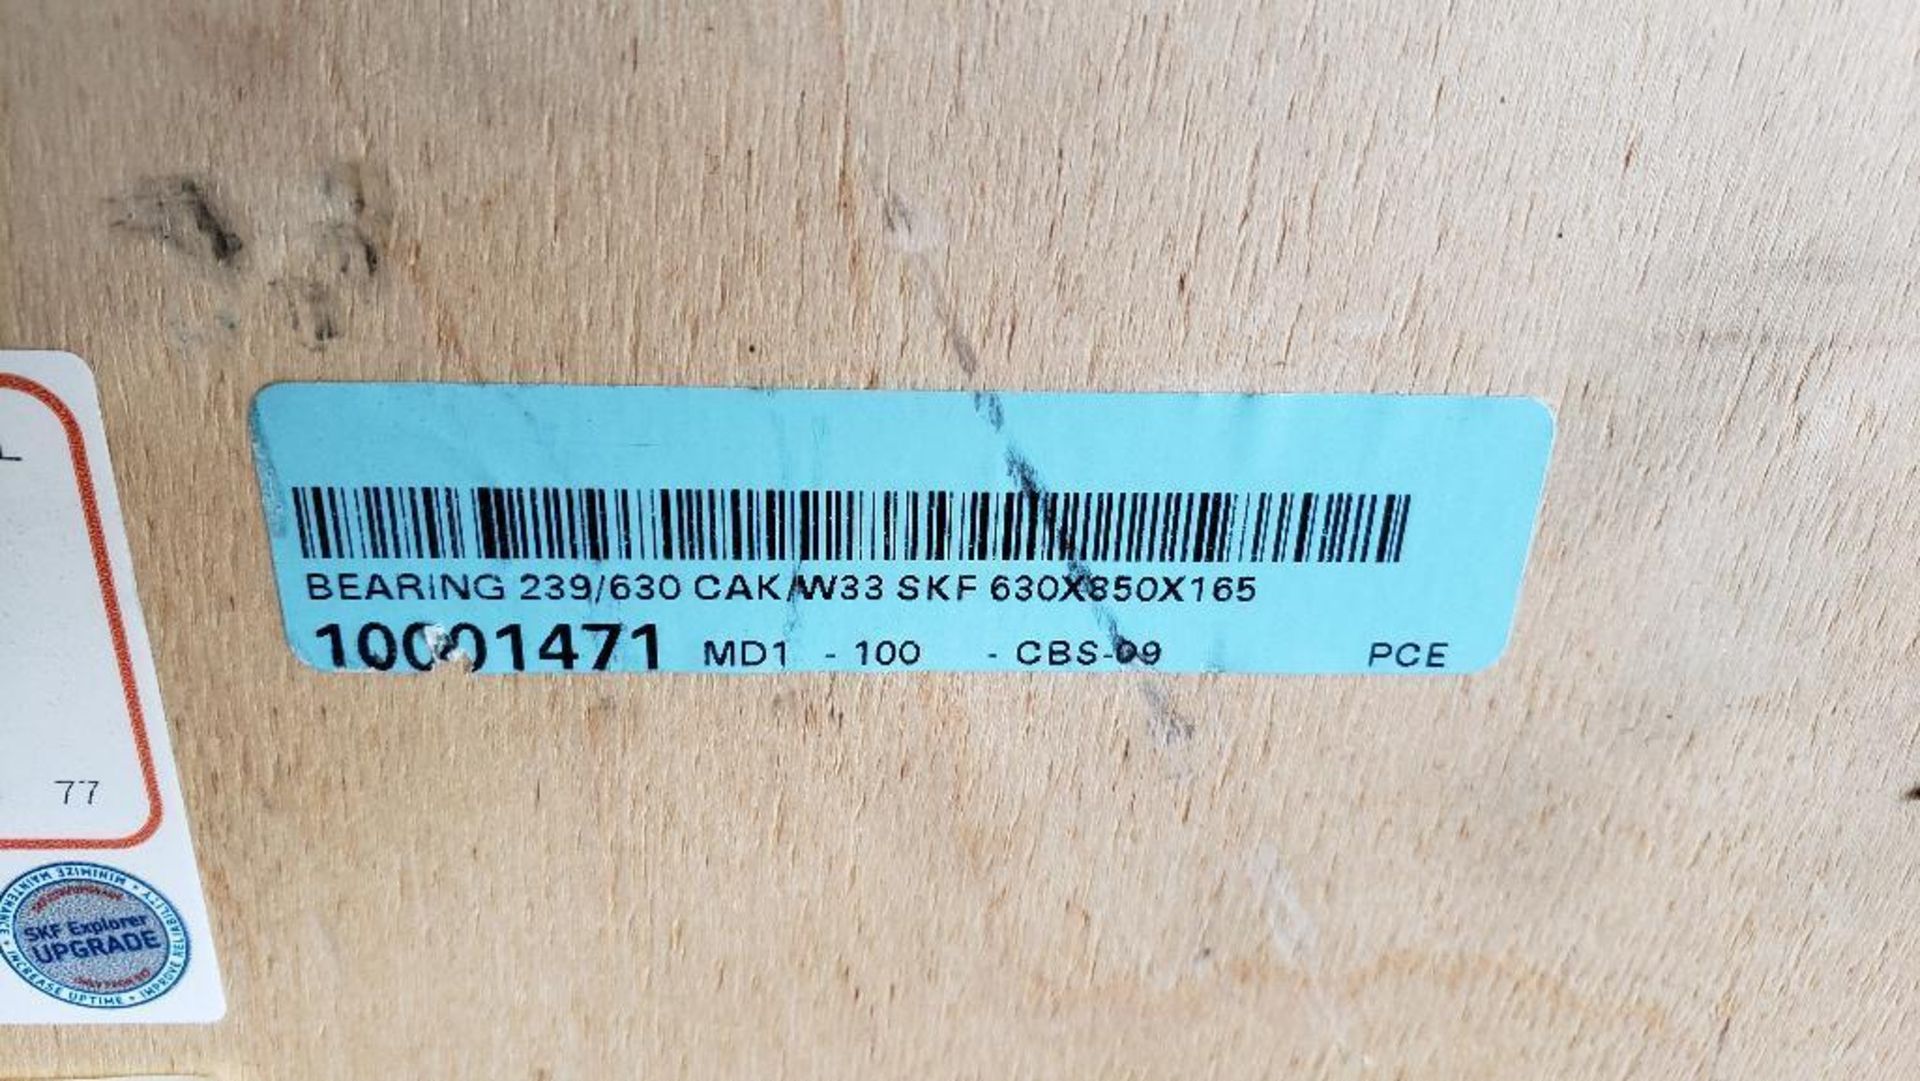 SKF super precision large capacity bearing. Part number 239/630 CAK/C083W507. New in crate. . - Image 2 of 5